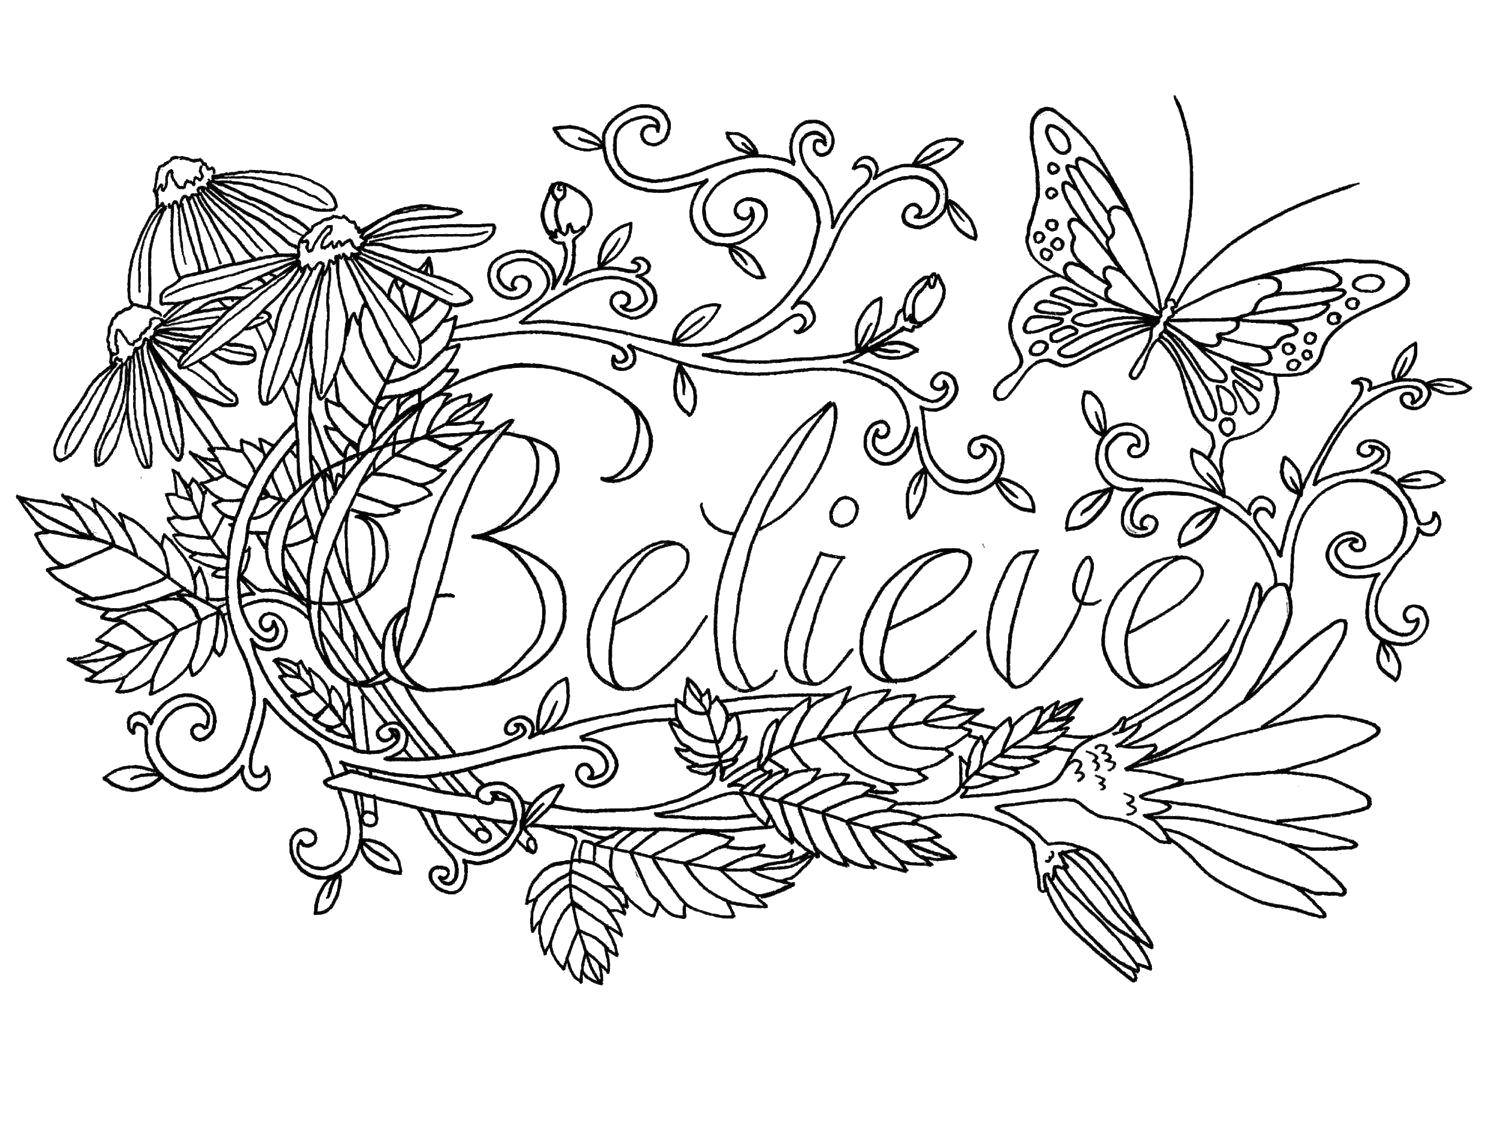 Coloring Believe. Category coloring antistress. Tags:  Bathroom with shower.